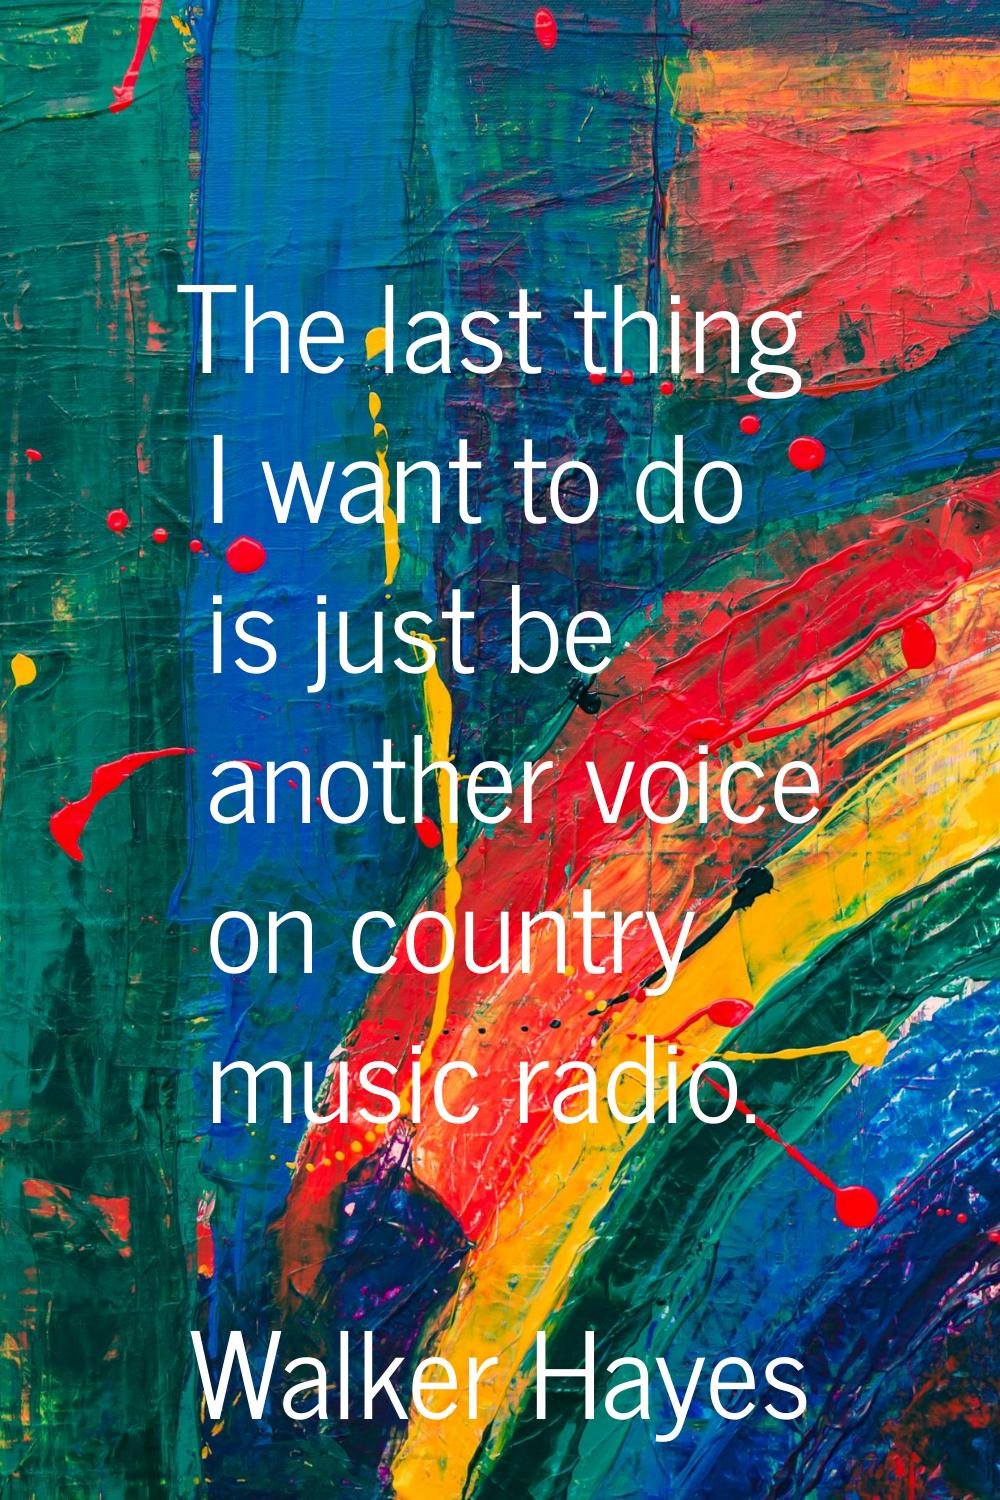 The last thing I want to do is just be another voice on country music radio.